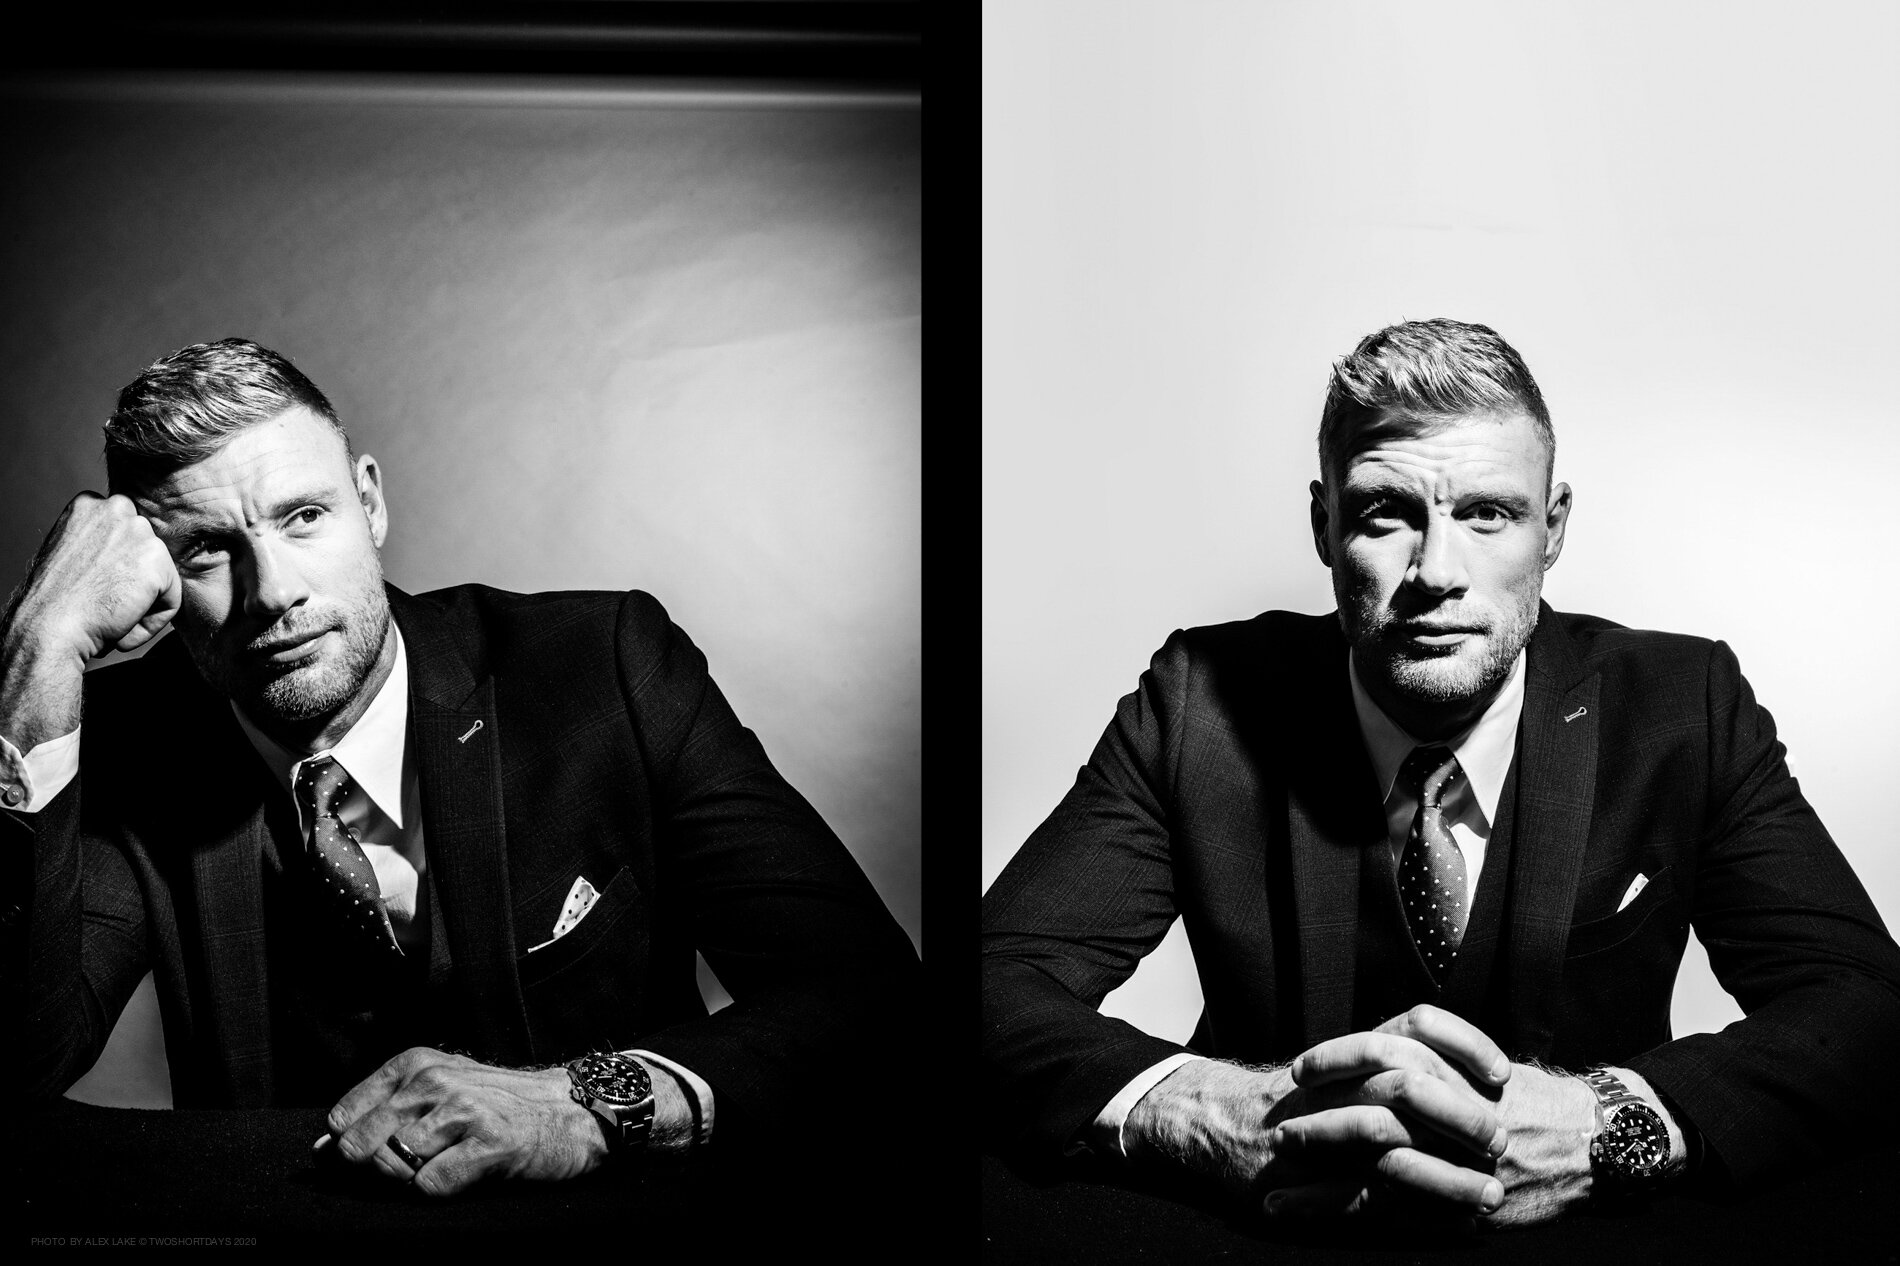 freddie_flintoff_photography_copyright_ALEX_LAKE_do_not_reproduce_without_permission_TWOSHORTDAYS.jpg